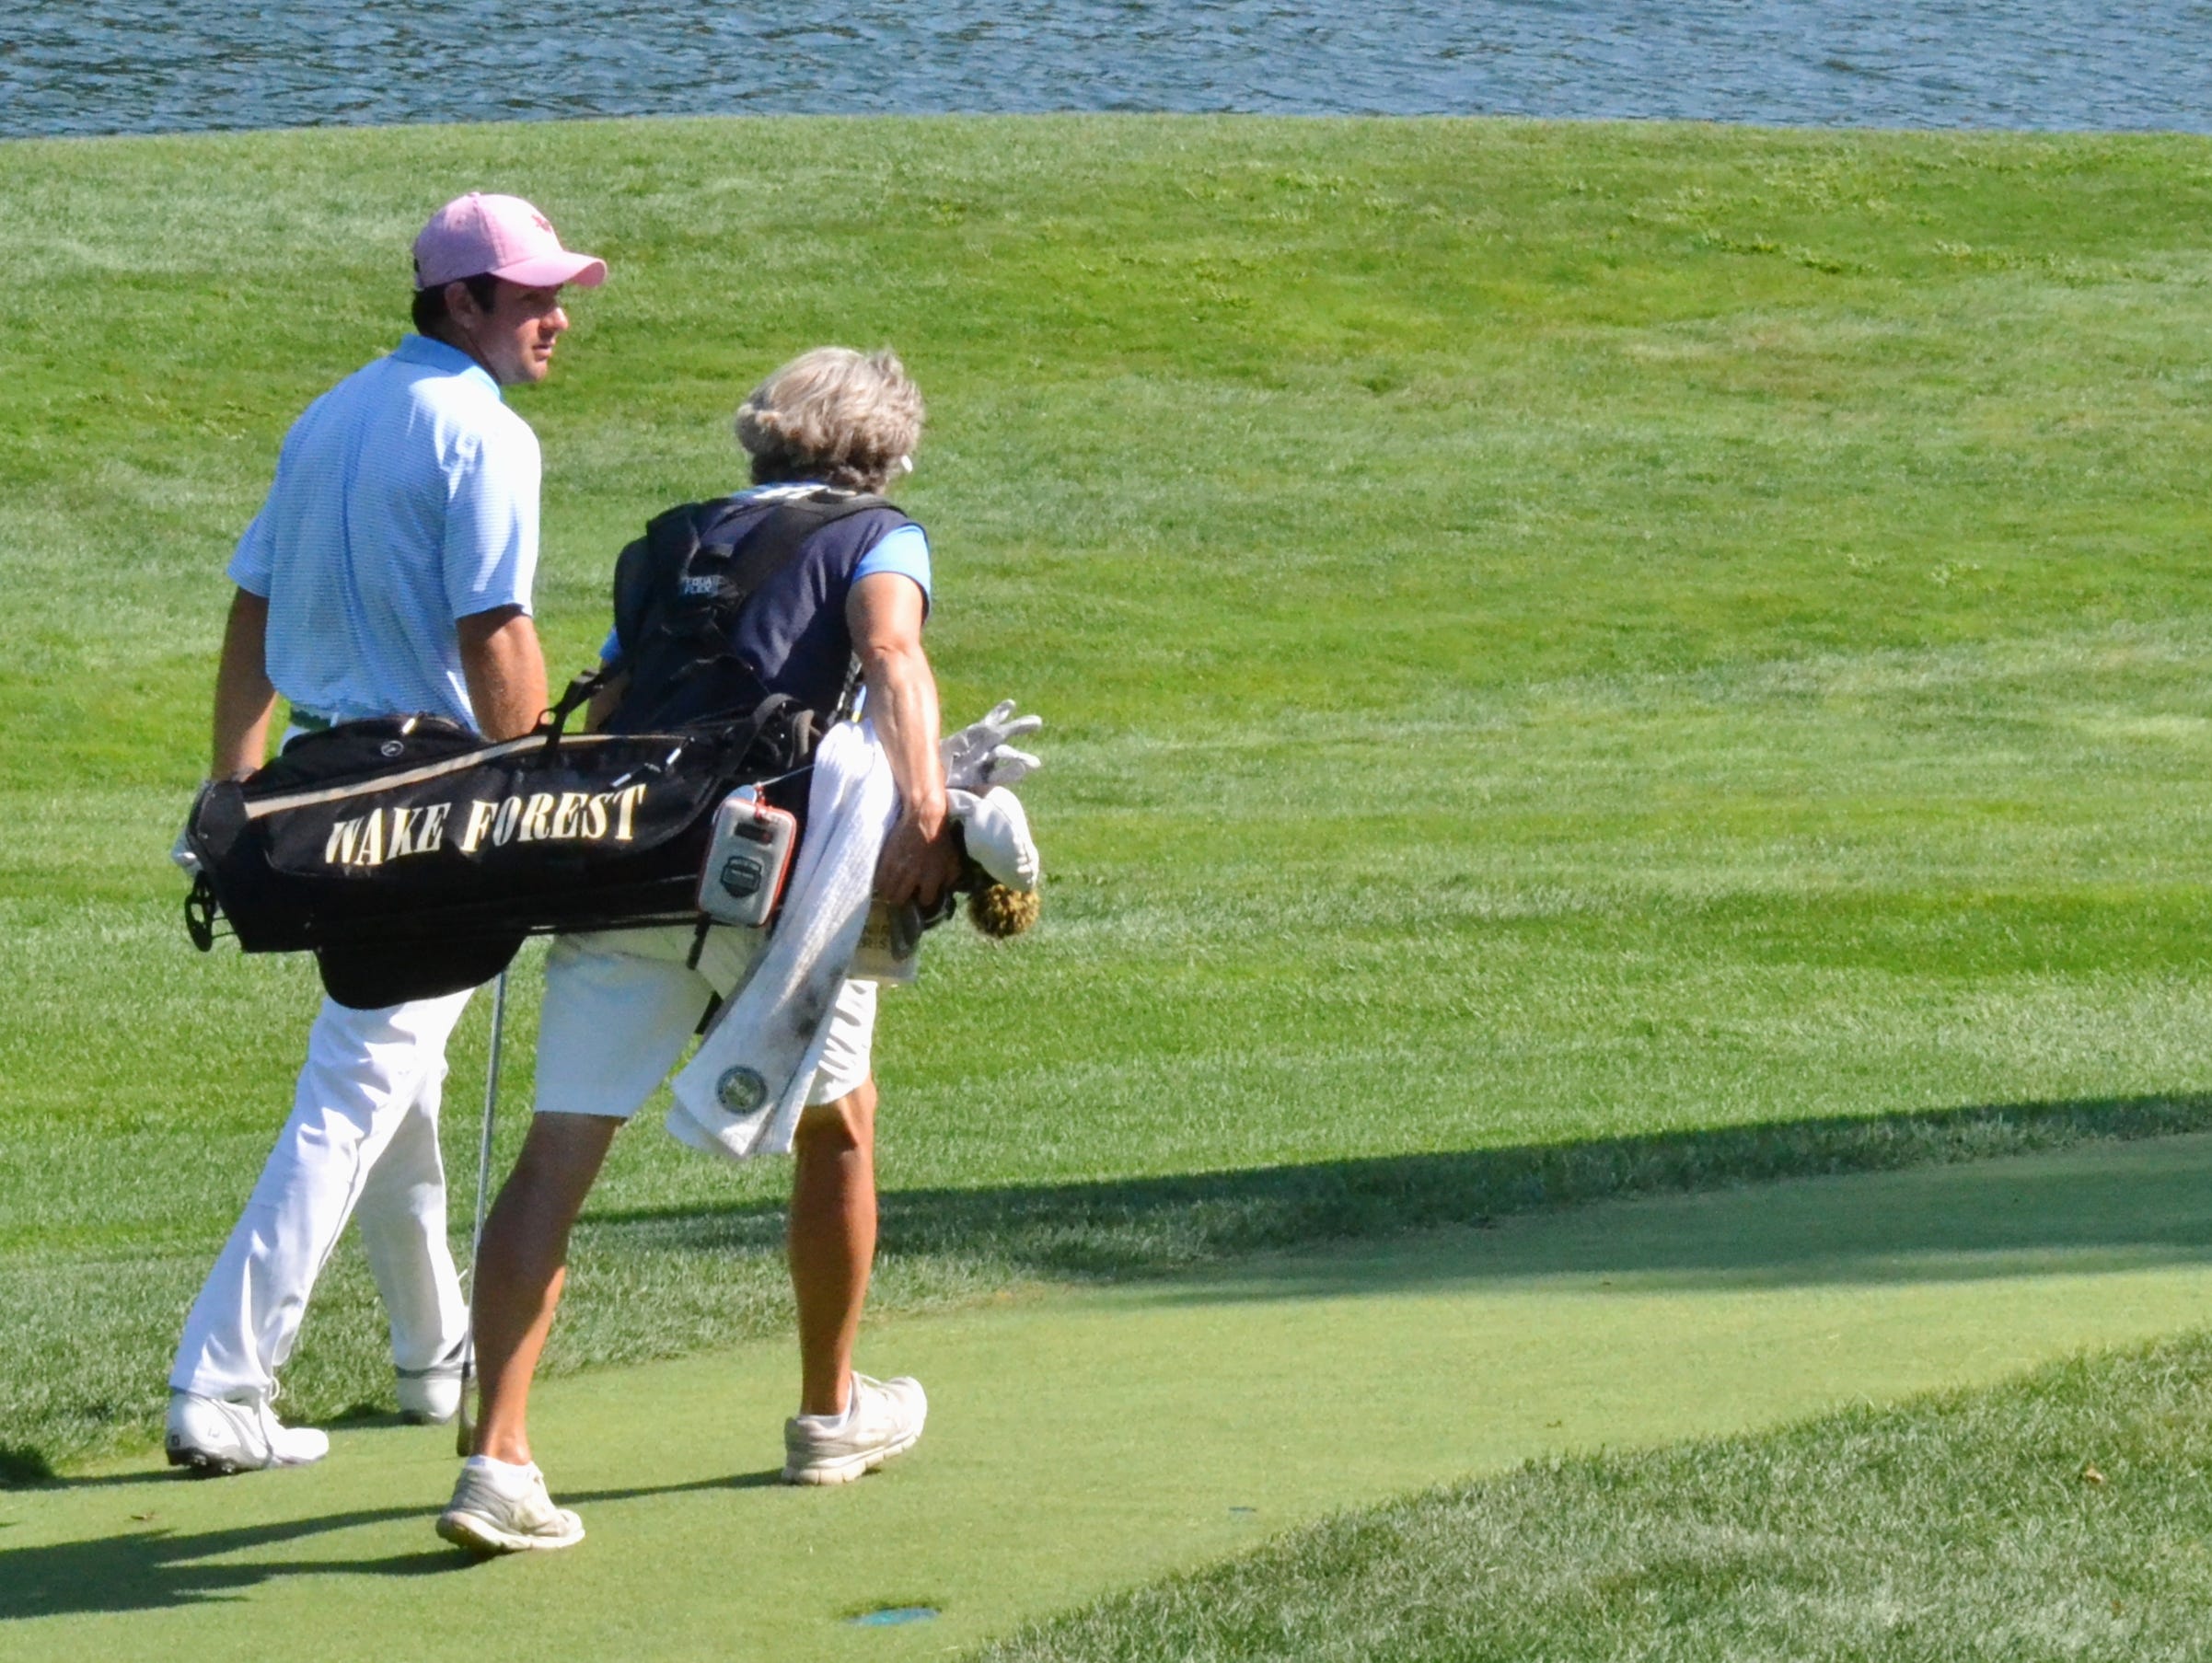 Cameron Young grew up playing at Sleepy Hollow Country Club where his father, David, is the longtime head pro. His mother, Barbara, often spends the summer caddying for the 19-year-old who won two collegiate tournaments last fall at Wake Forest University.